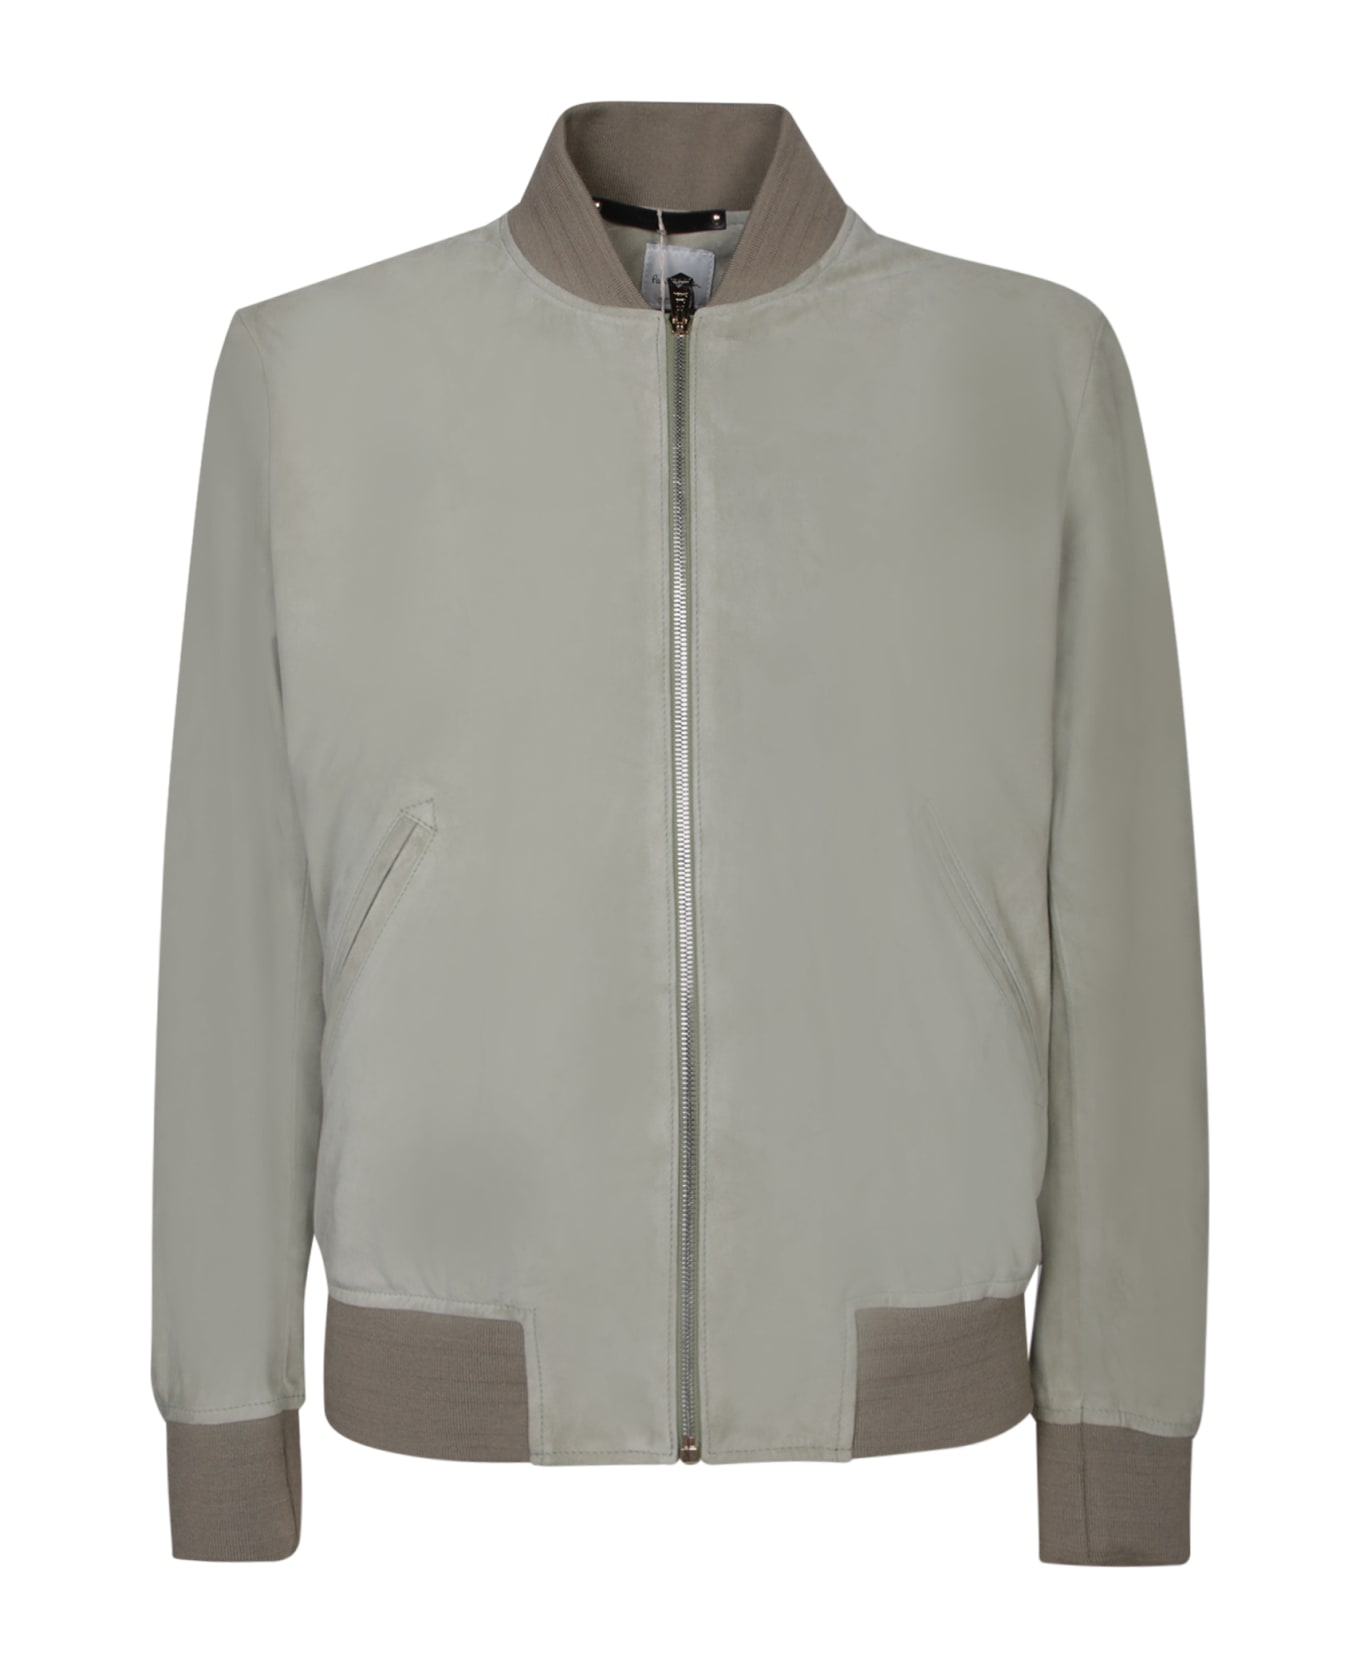 Paul Smith Suede Bomber Jacket - Green